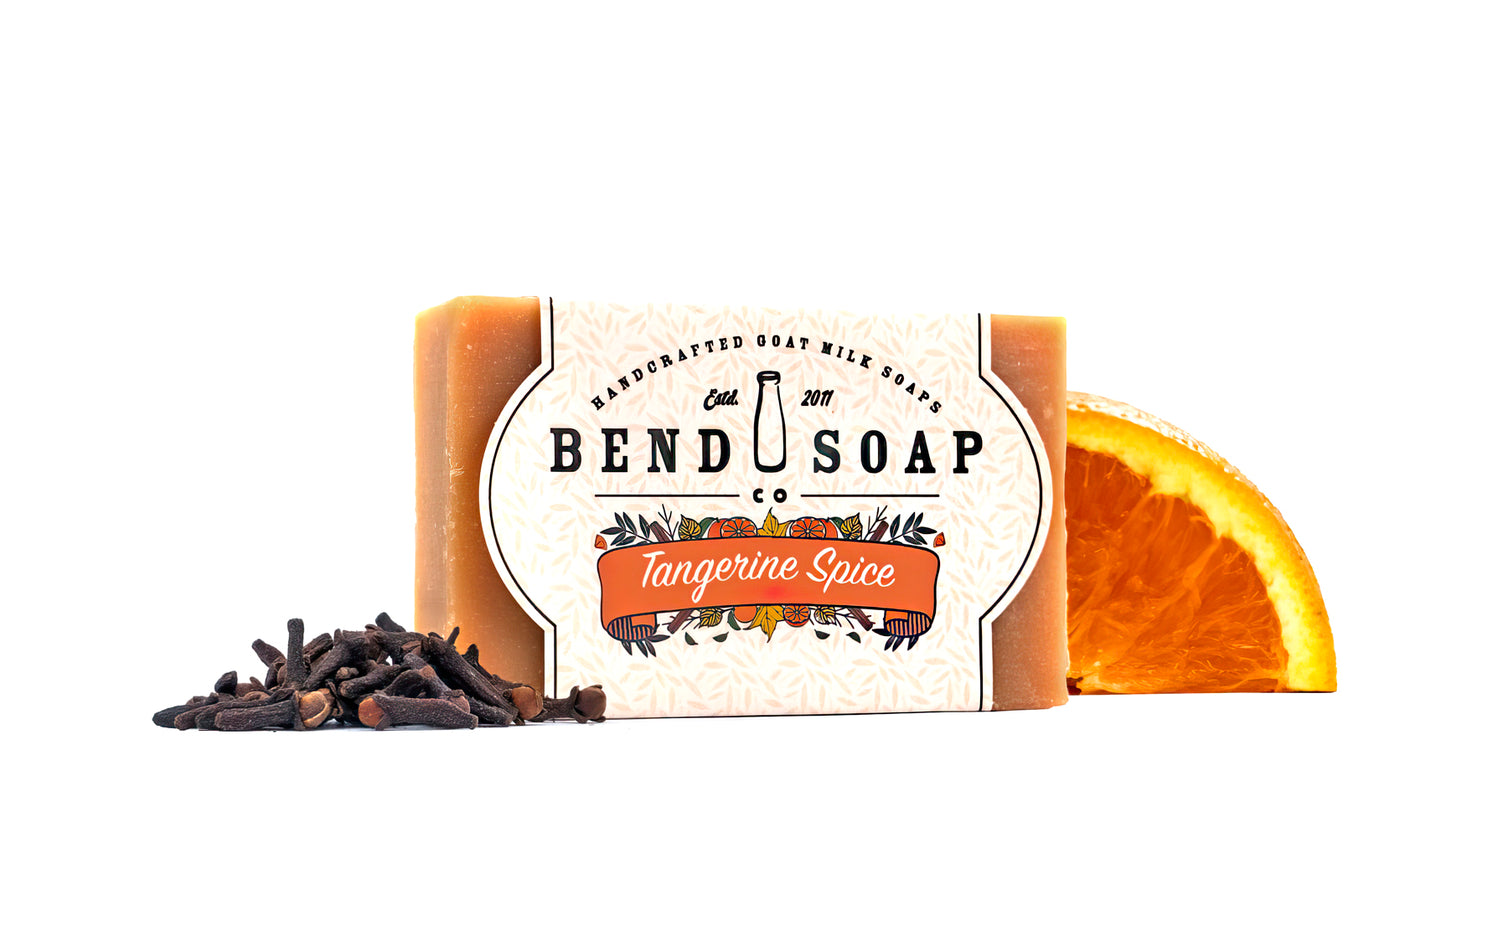 Mood-Enhancing Soaps : limited edition soap